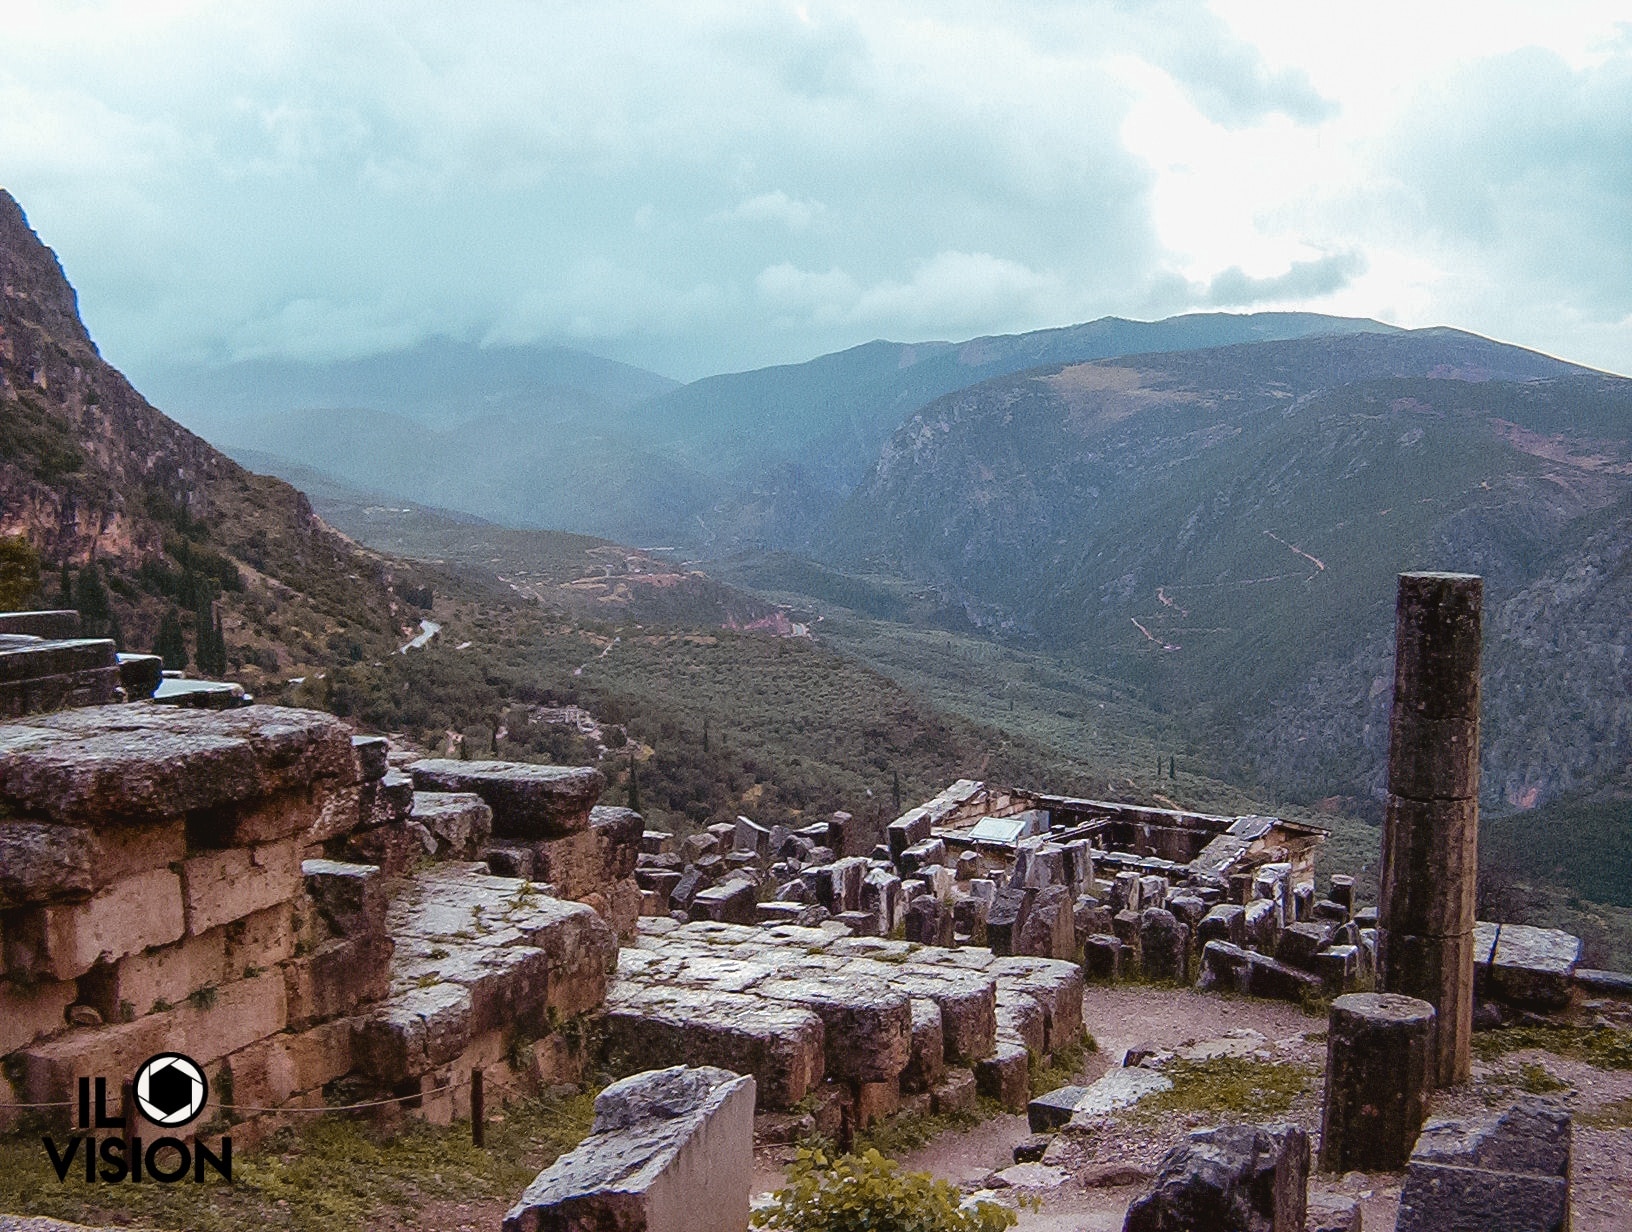 10 Fascinating Fact About Delphi